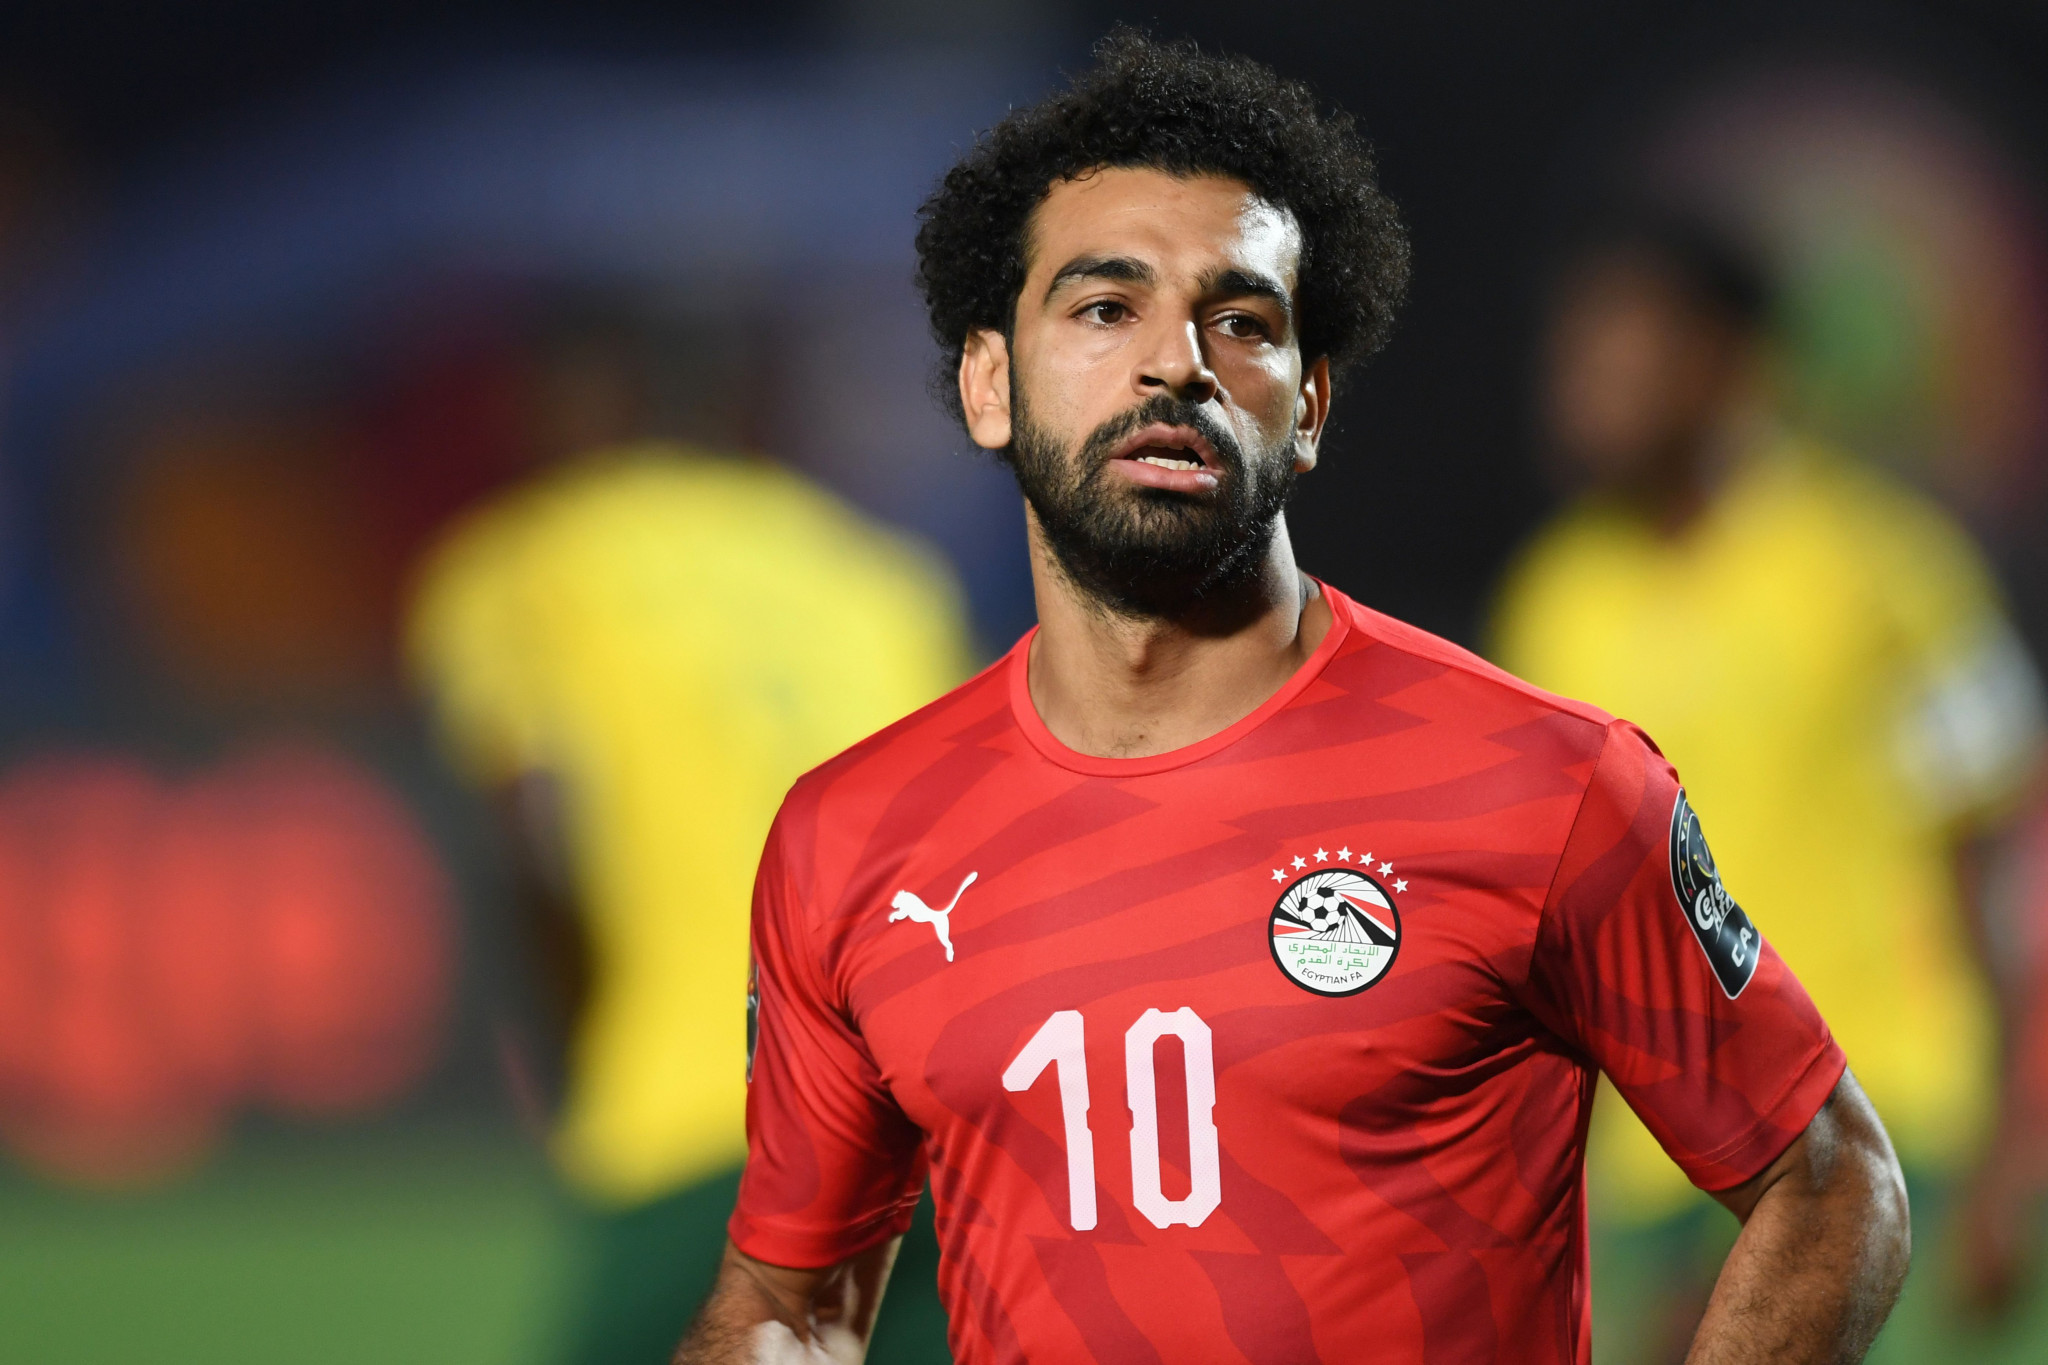 Egypt make official request to Liverpool to play Salah at Tokyo 2020